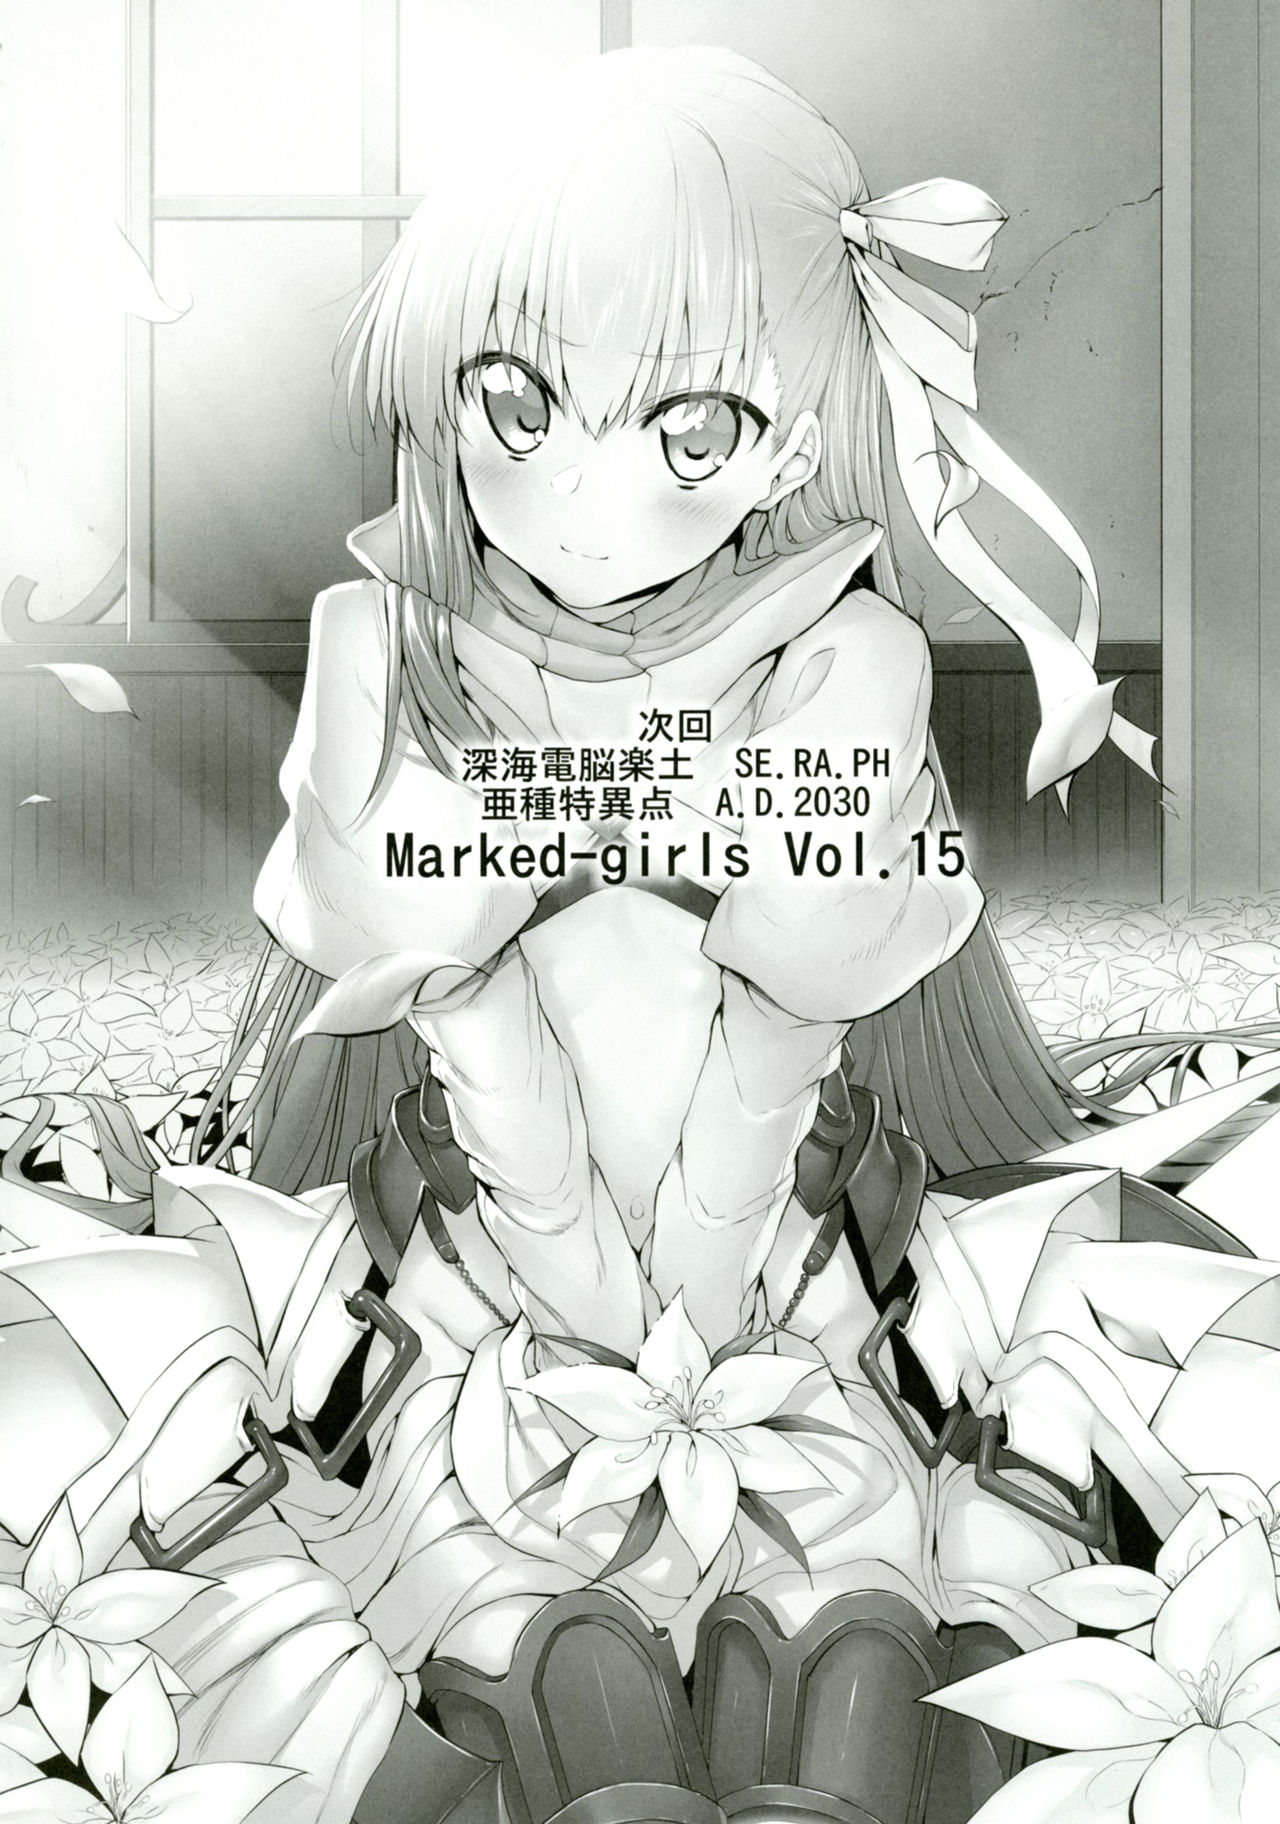 [Marked-two (スガヒデオ)] Marked girls vol.14 (Fate/Grand Order) [DL版]